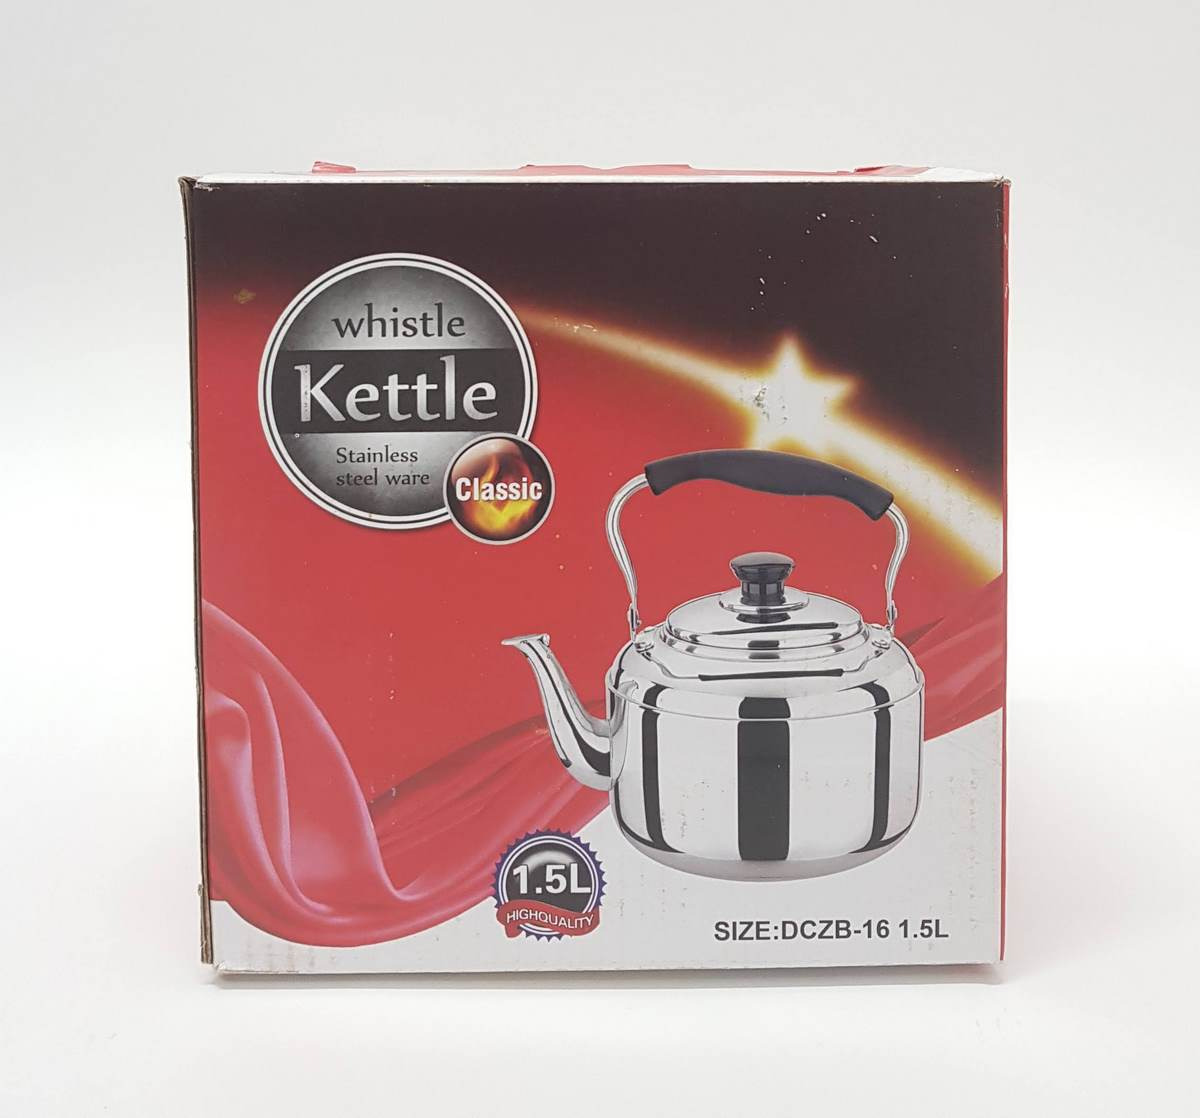 Whistle Kettle Stainless Steel Ware